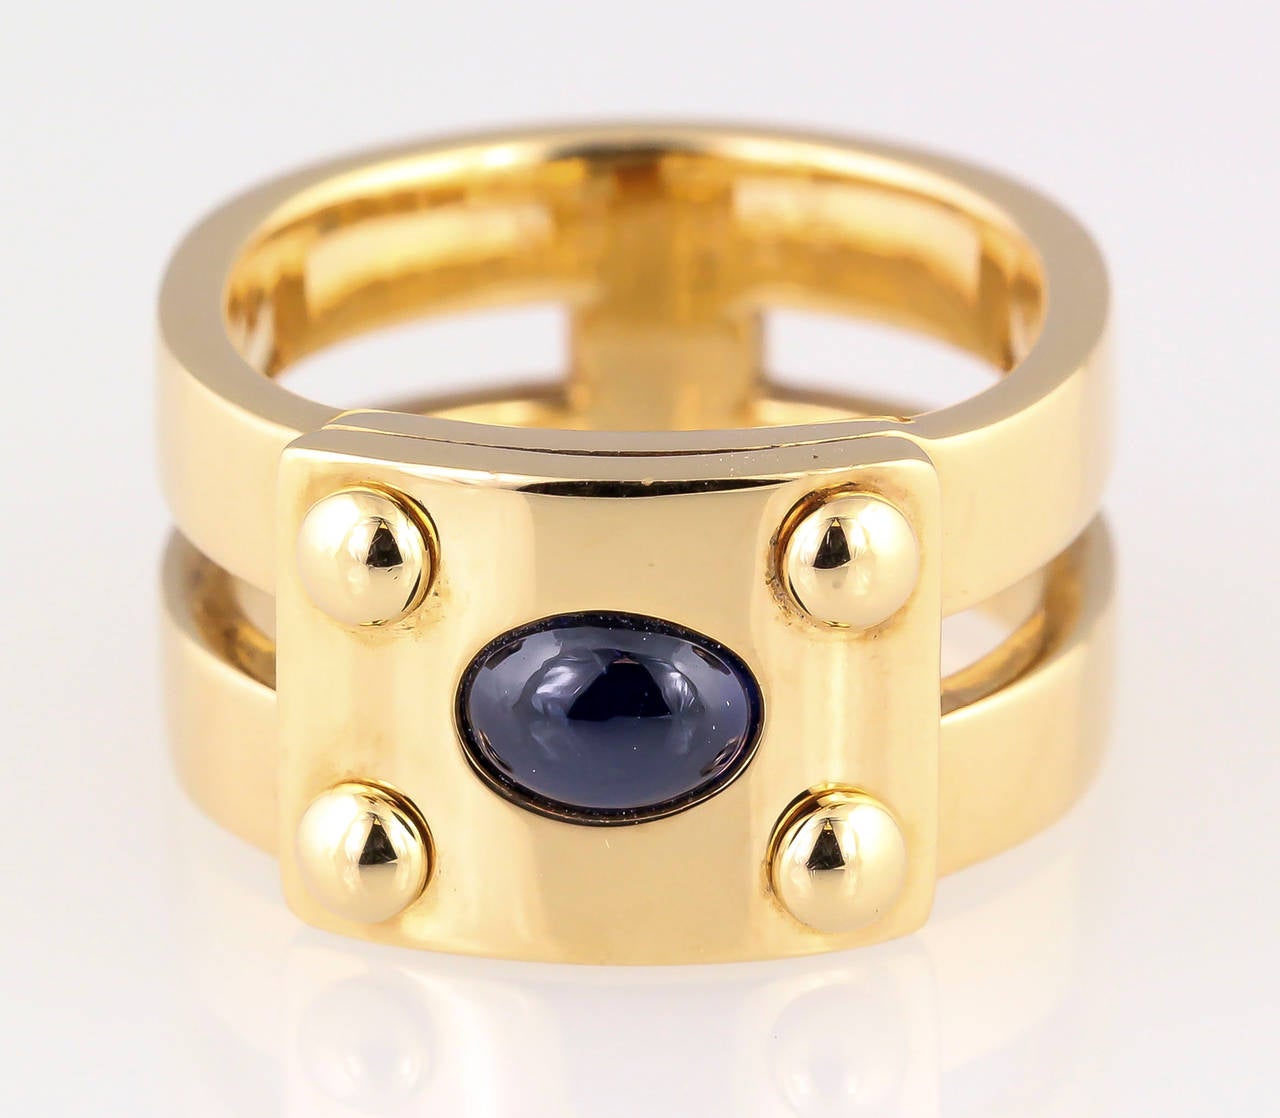 Elegant 18k yellow gold and cabochon sapphire ring by Hermes. Size 52.
Hallmarks: Hermes, 750, reference numbers, maker's mark, French 18K gold assay mark.